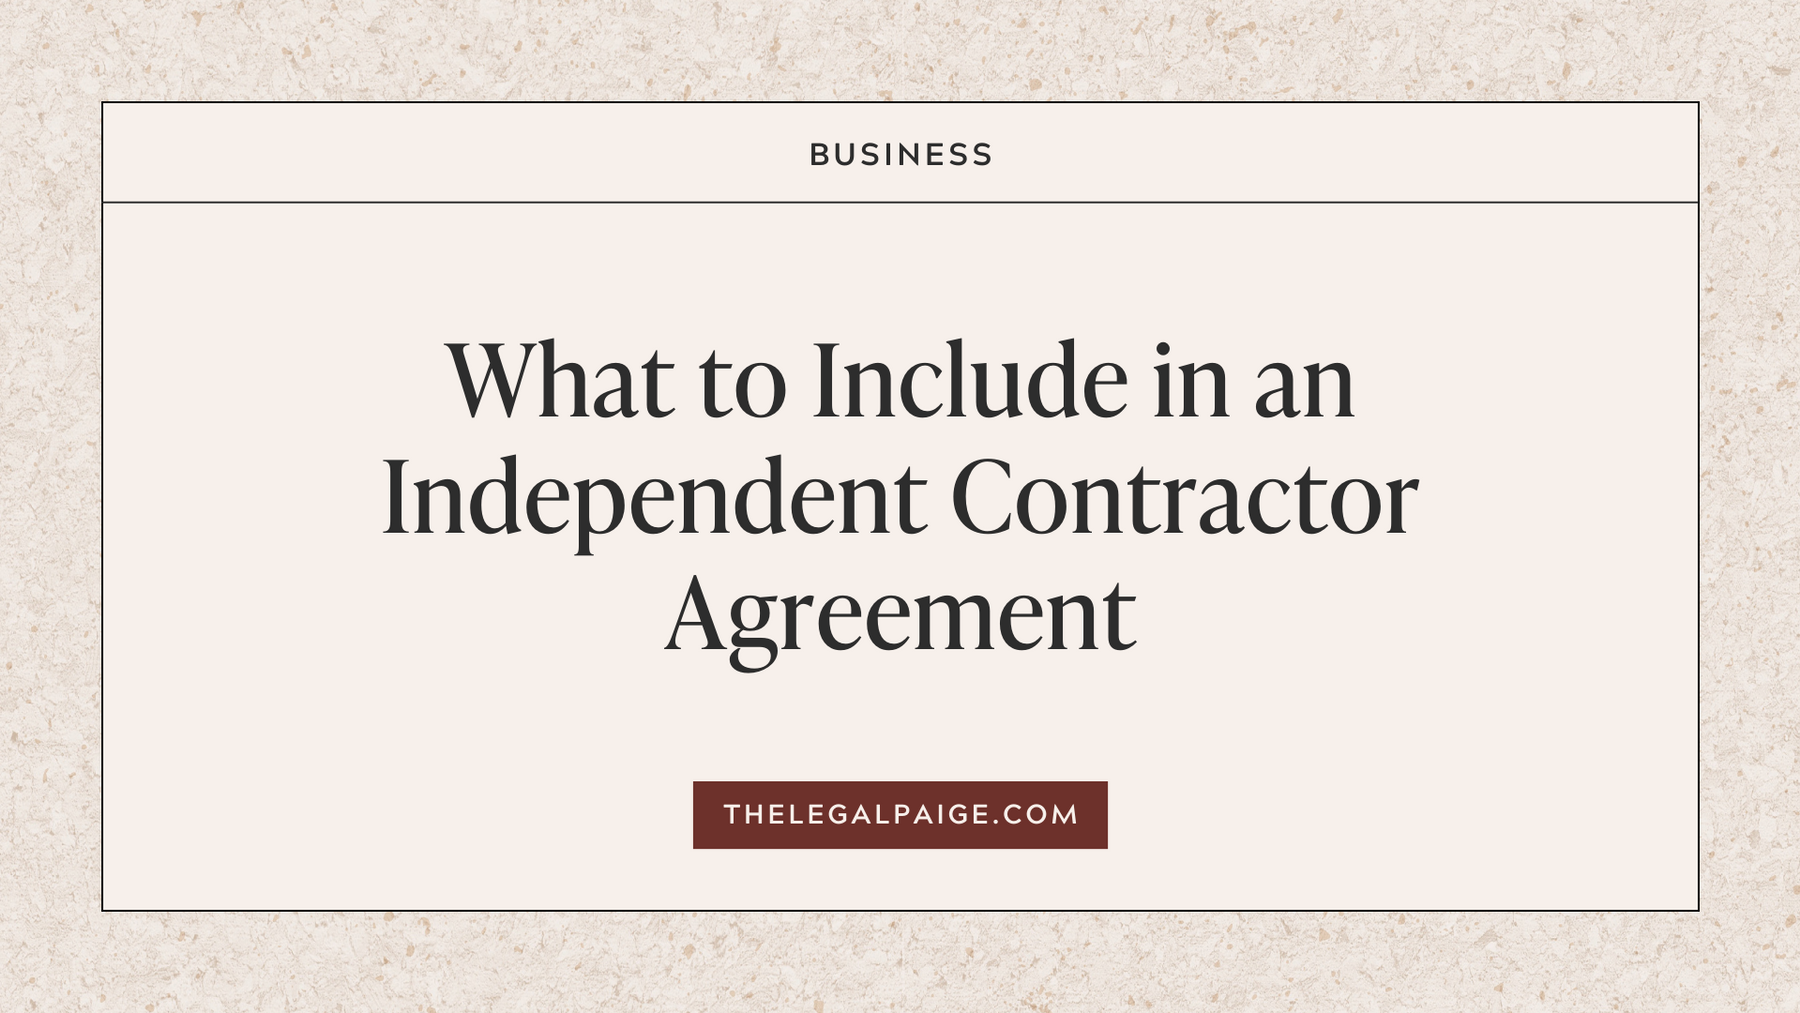 What to Include in an Independent Contractor Agreement